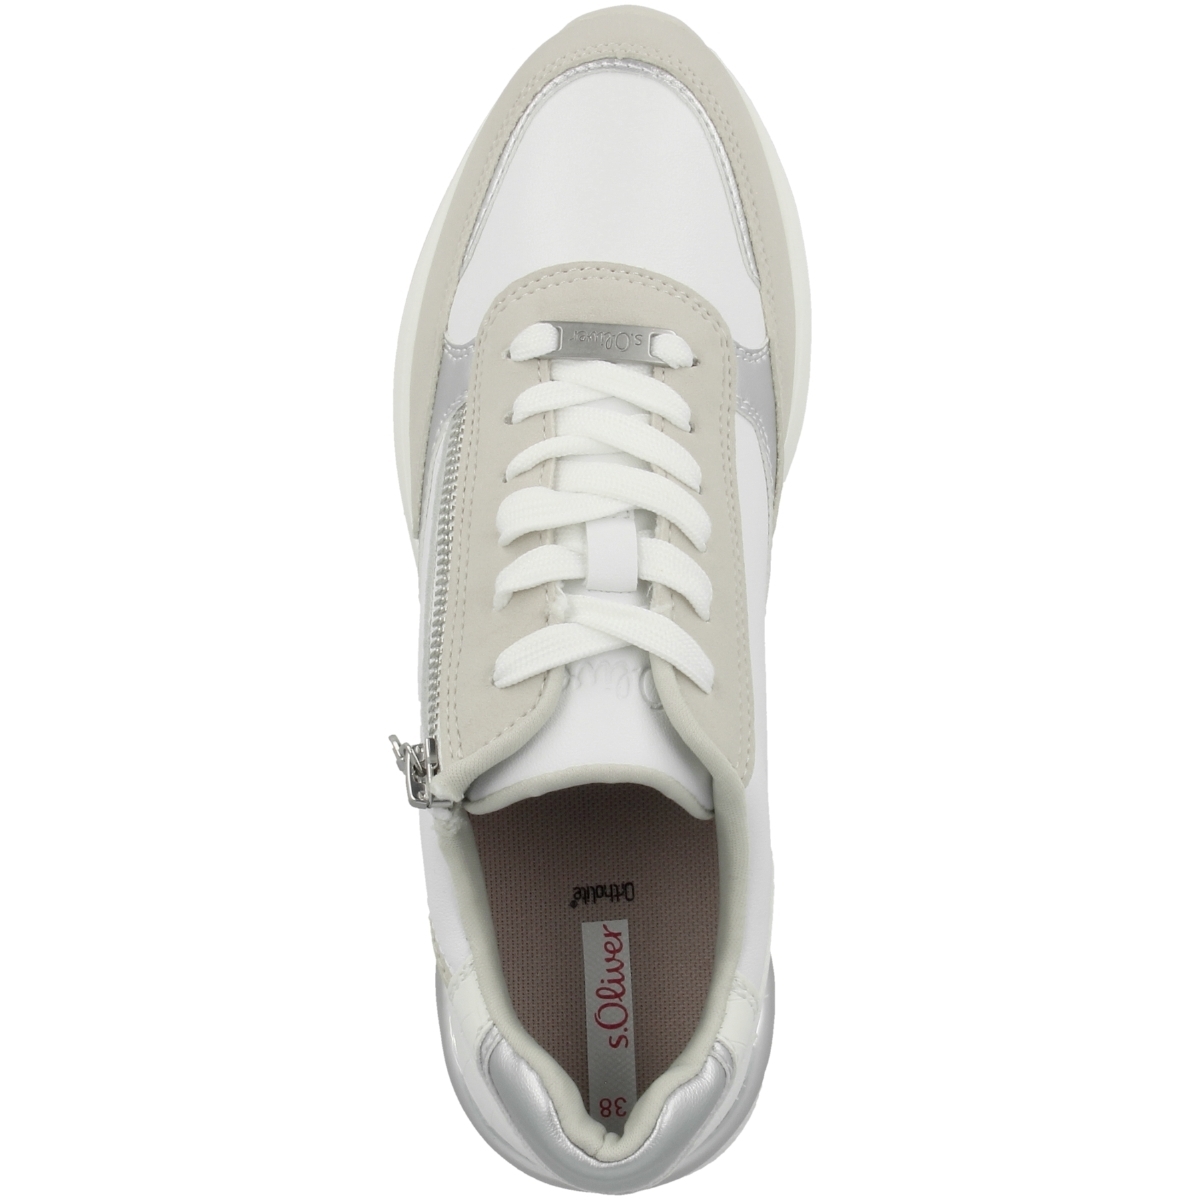 s.Oliver 5-23608-38 Sneaker low